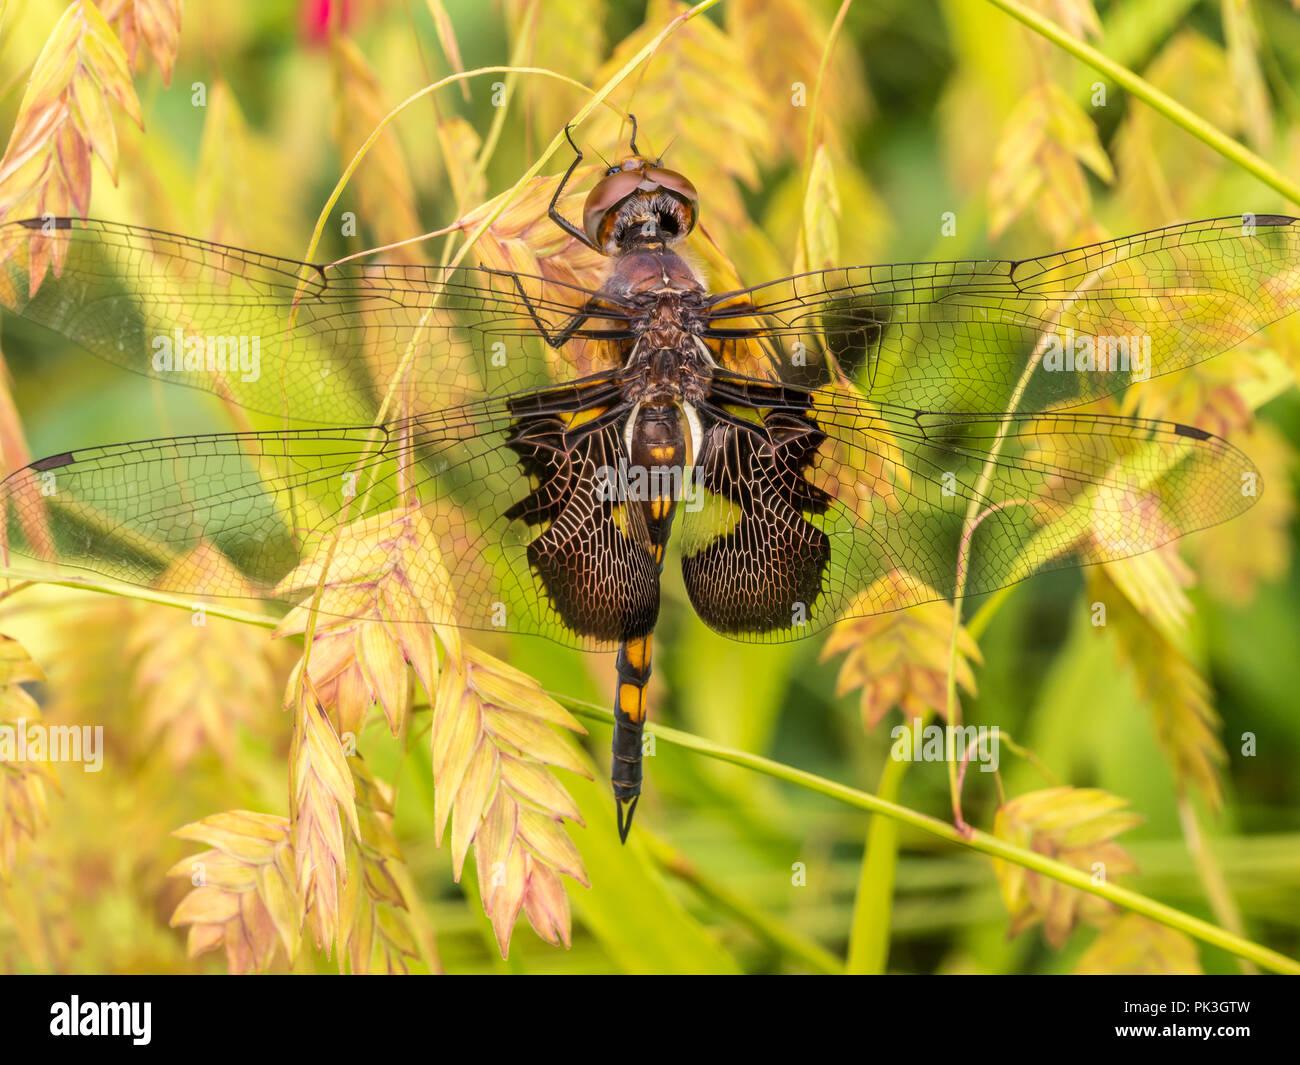 black-saddlebags-tramea-lacerata-is-a-species-of-skimmer-dragonfly-found-throughout-north-americ-PK3GTW.jpg